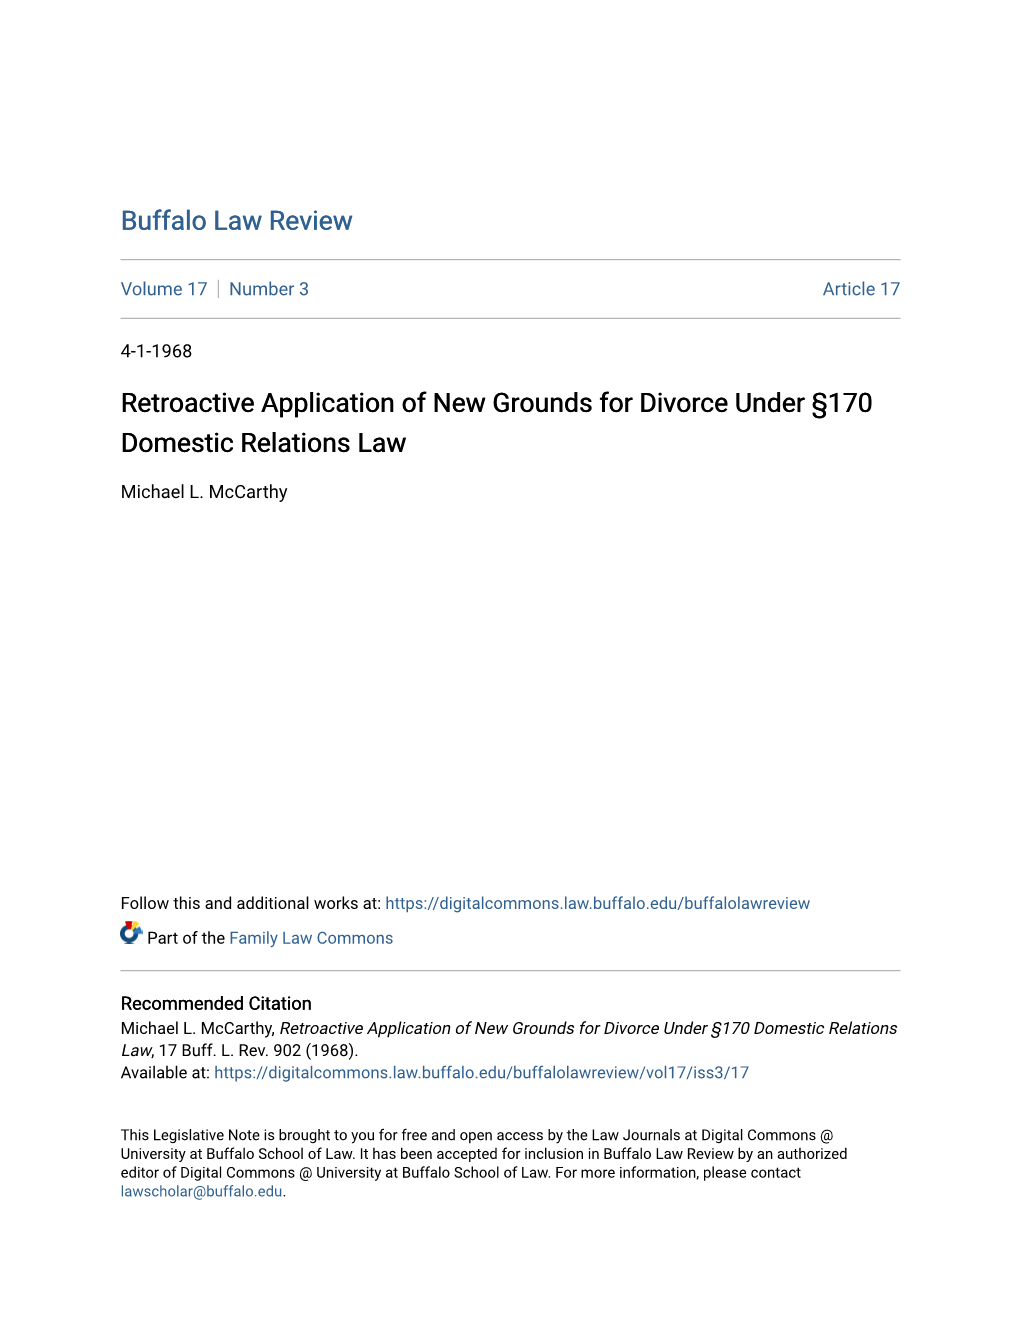 Retroactive Application of New Grounds for Divorce Under Â§170